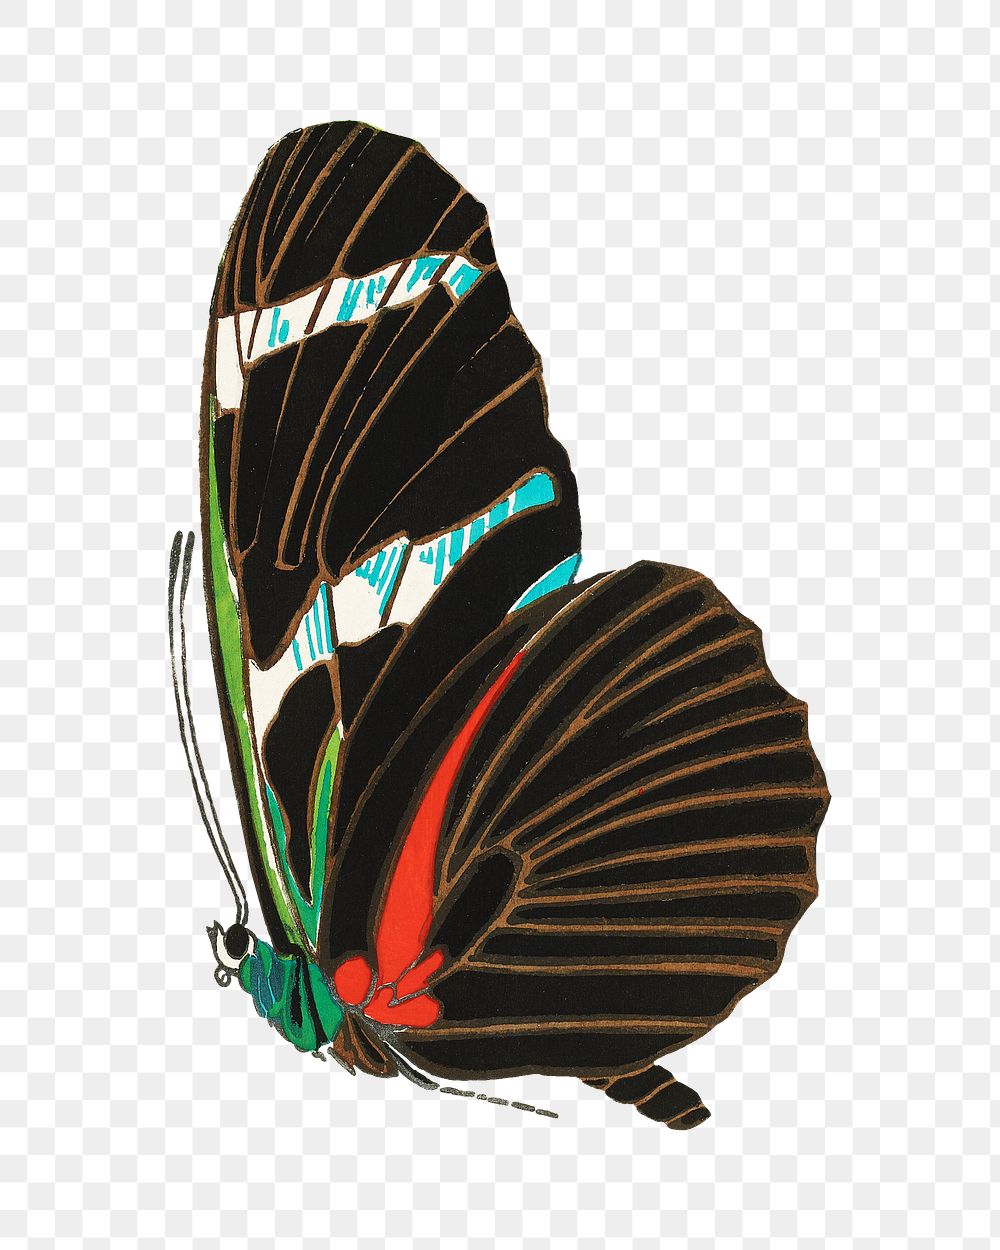 Exotic butterfly png sticker, vintage insect on transparent background. E.A. S&eacute;guy's artwork remixed by rawpixel